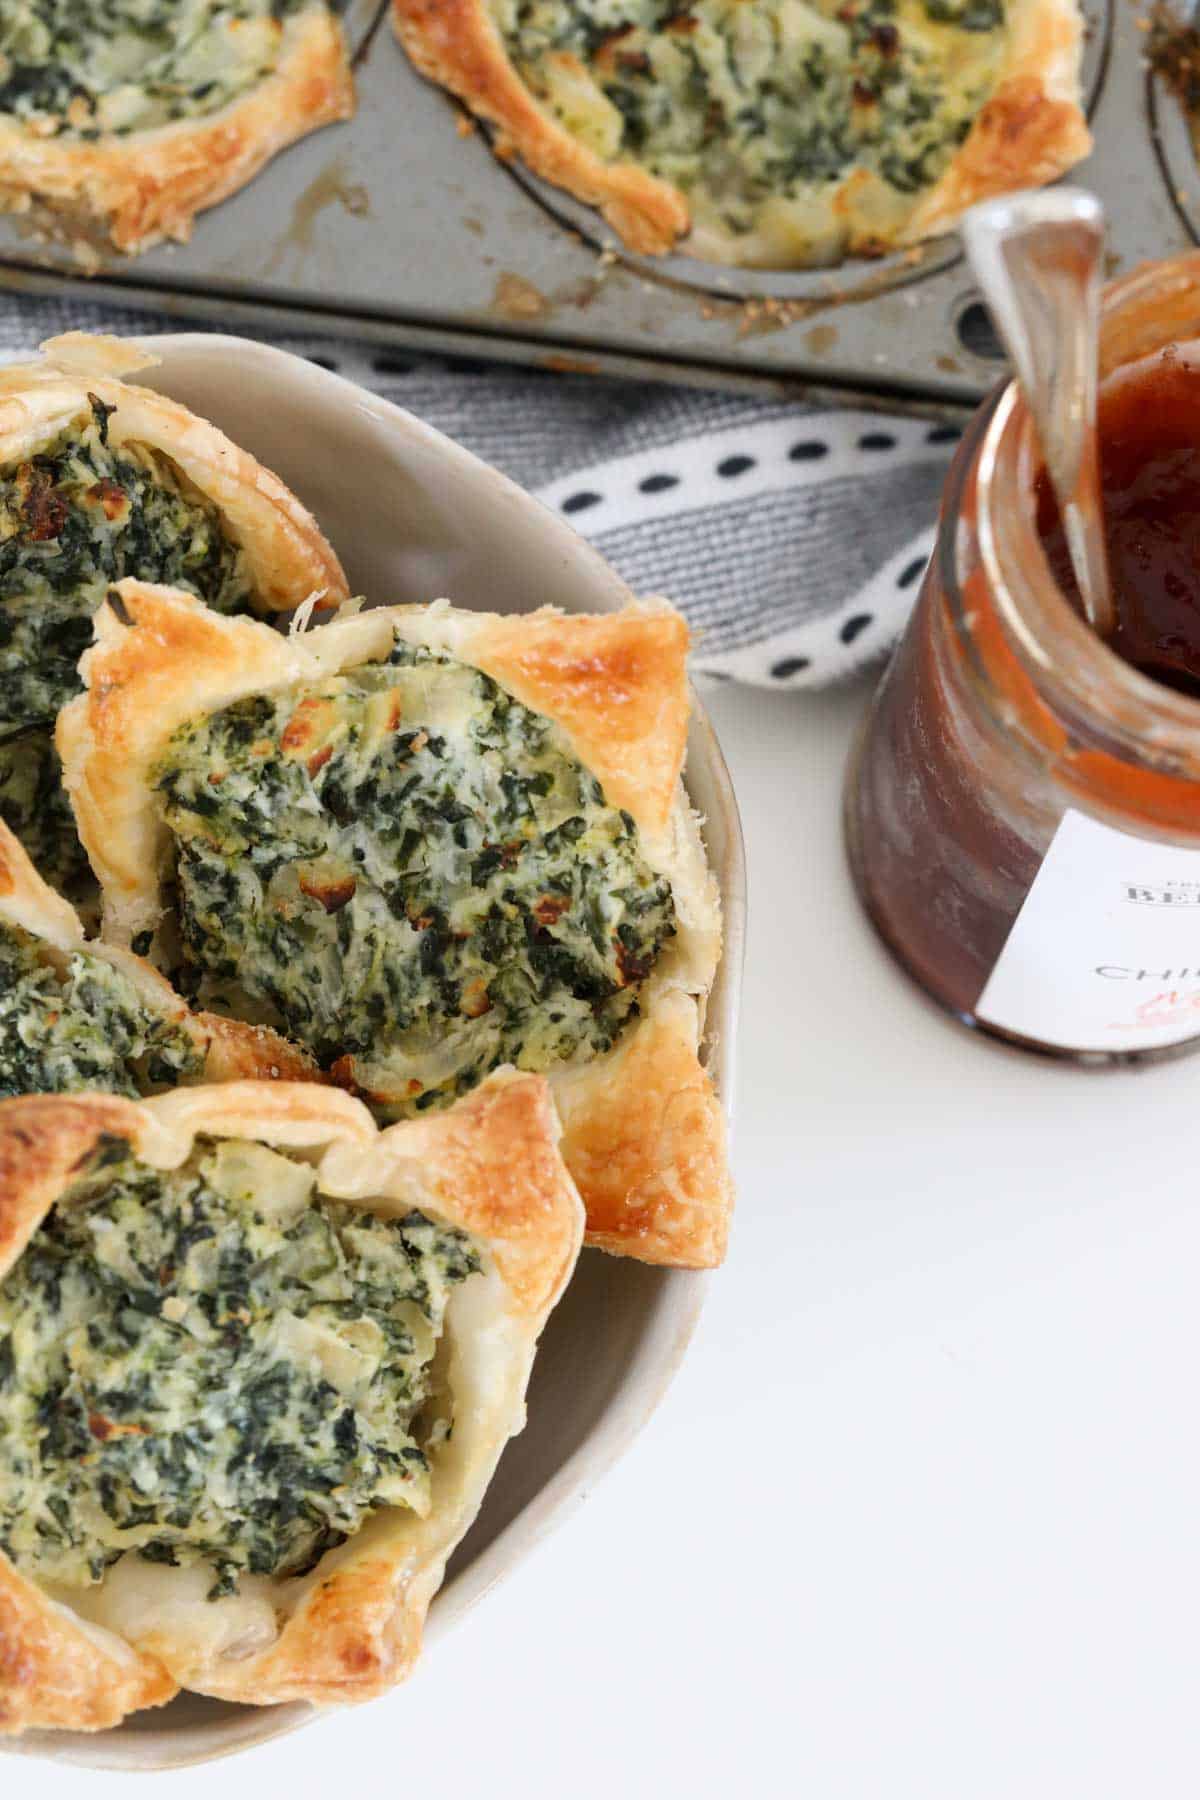 Ricotta and spinach pastries served with a jar of chutney nearby.